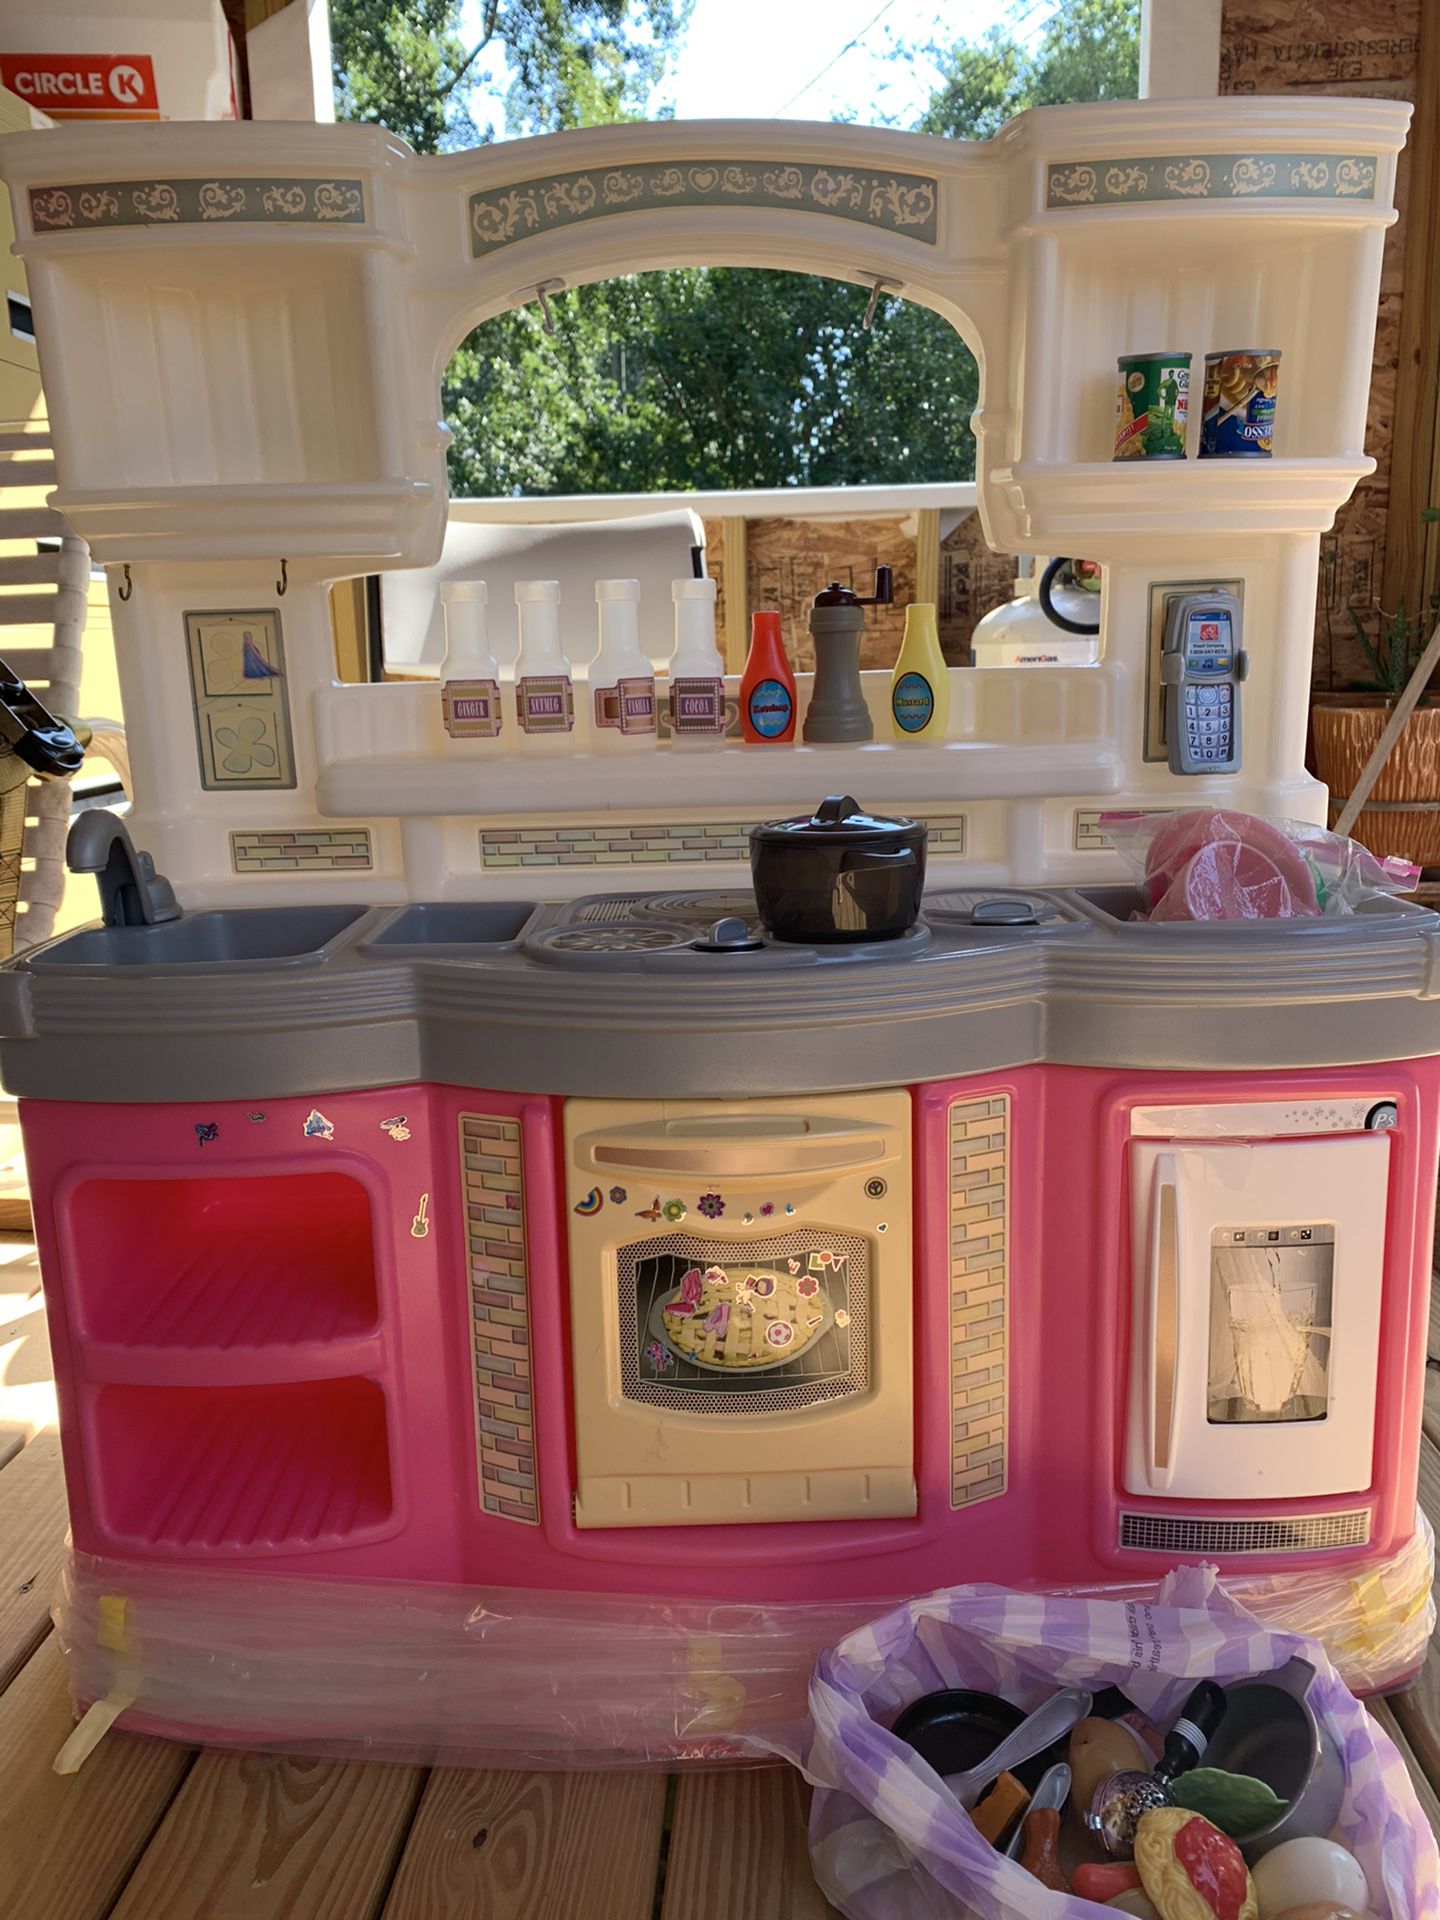 Toy kitchen with accessories